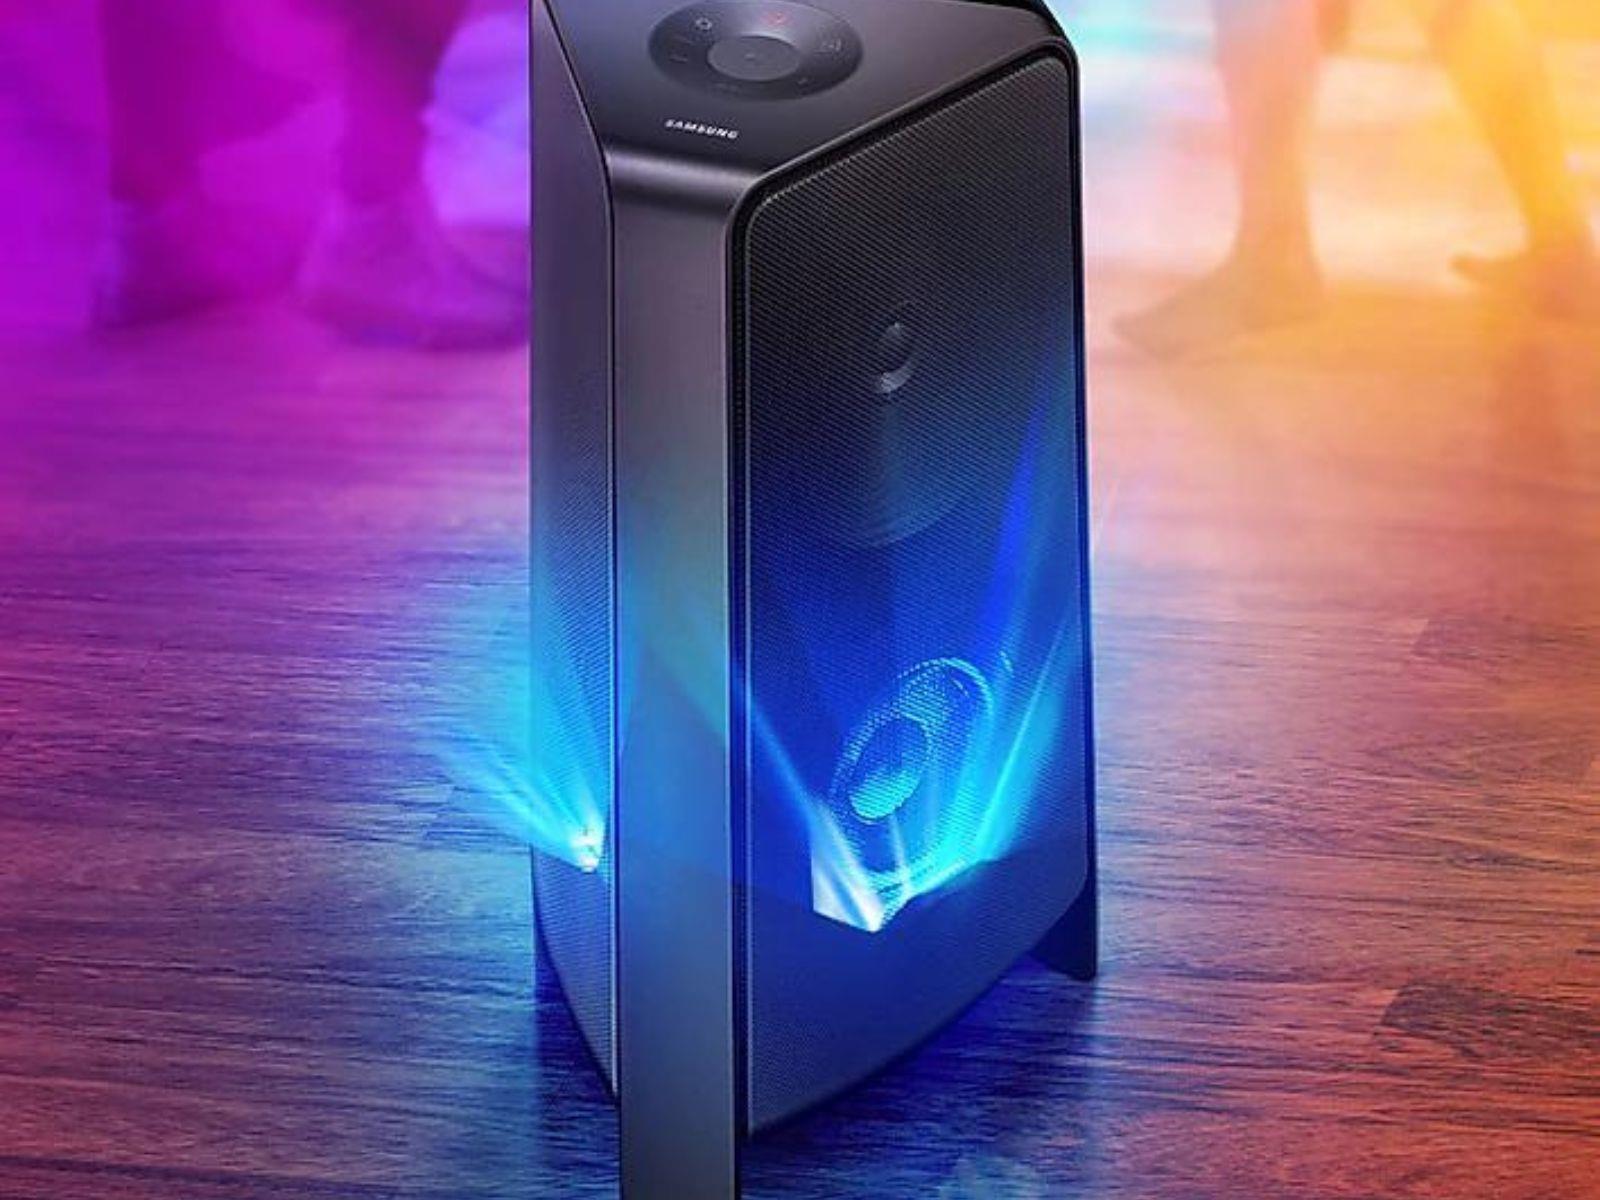 Samsung MX-T50 Sound Tower with LED lights on